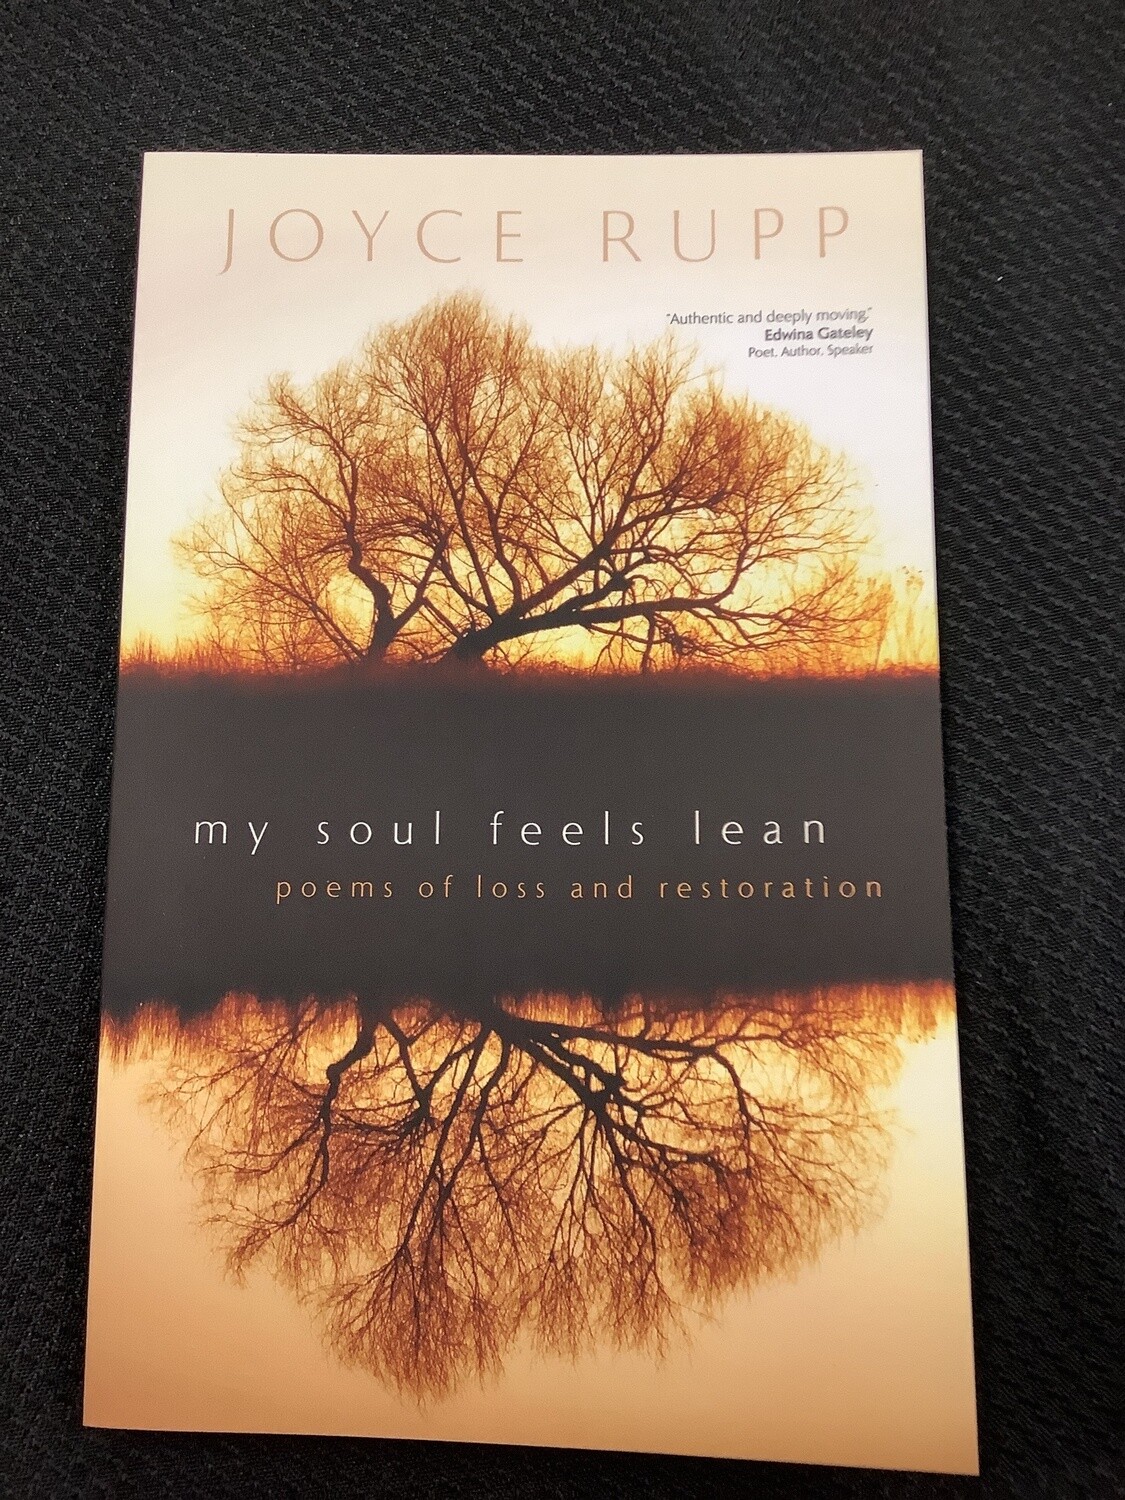 My Soul Feels Lean Poems of Loss and Restoration - Joyce Rupp